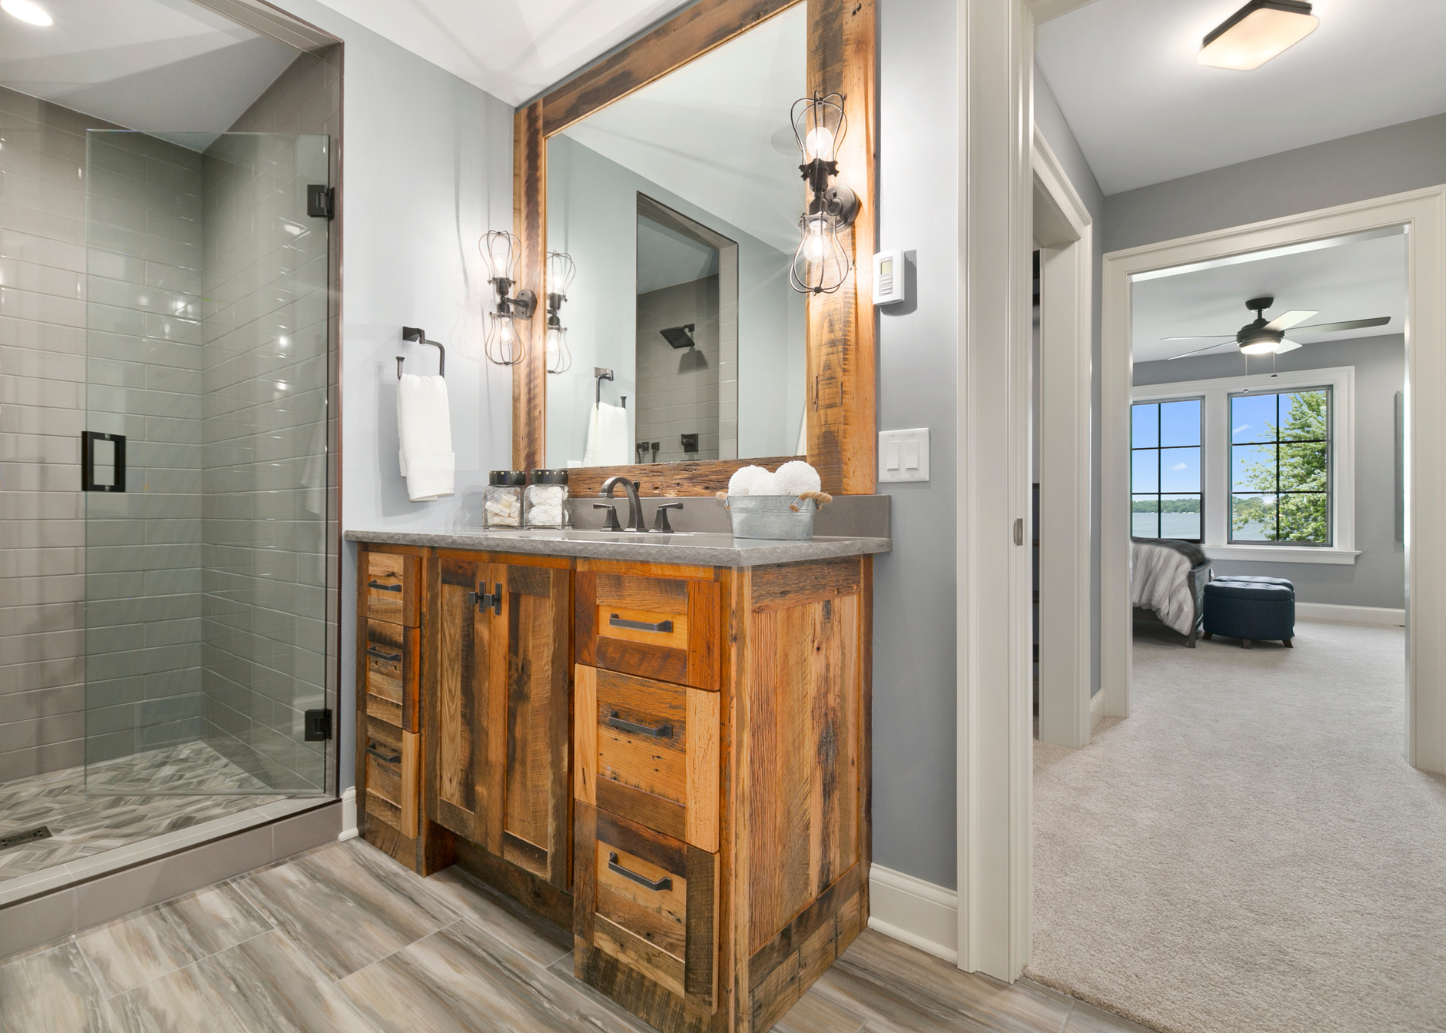 What Finish Suits a Bathroom Vanity Best?